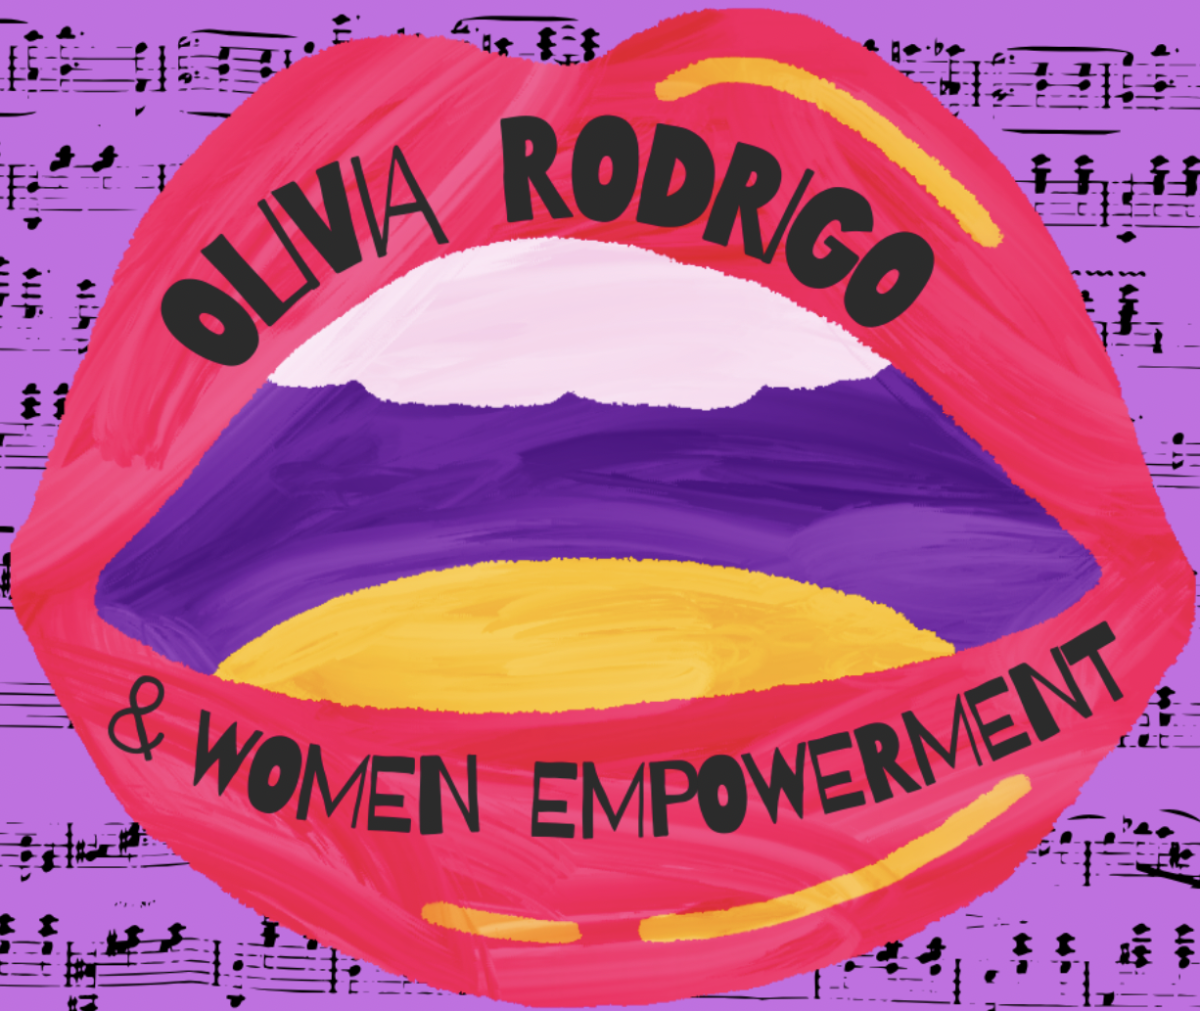 People+share+impact+of+Olivia+Rodrigo%2C+other+young+female+artists+on+young+women